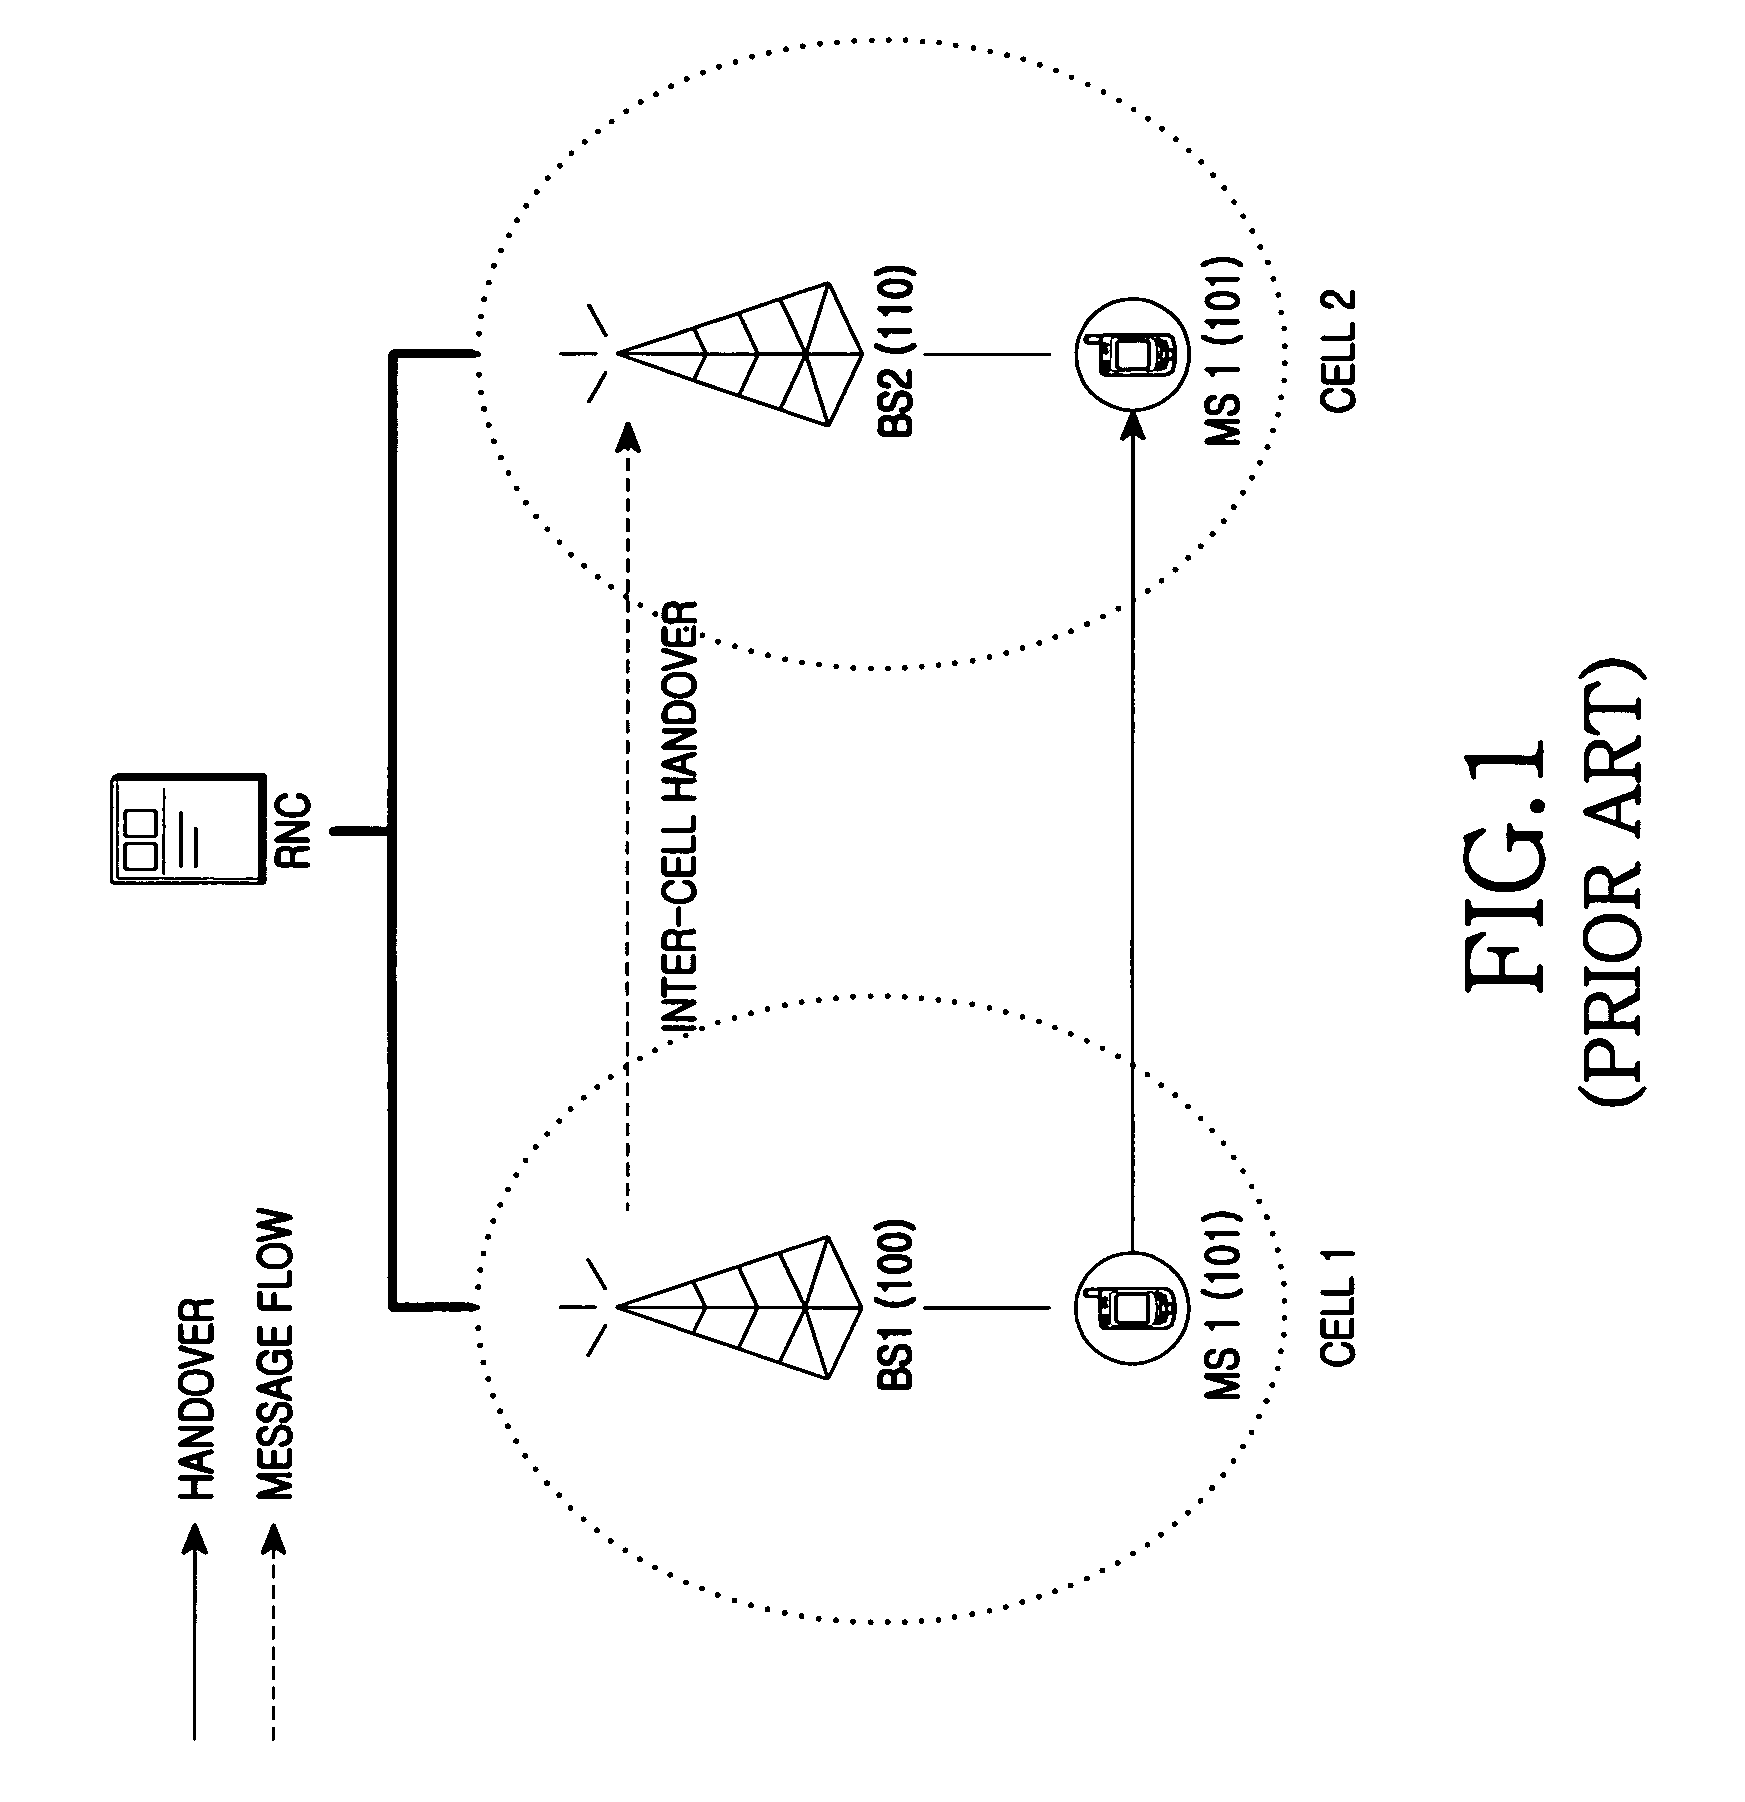 Preamble design method for reducing overhead during handover in hierarchical cellular system